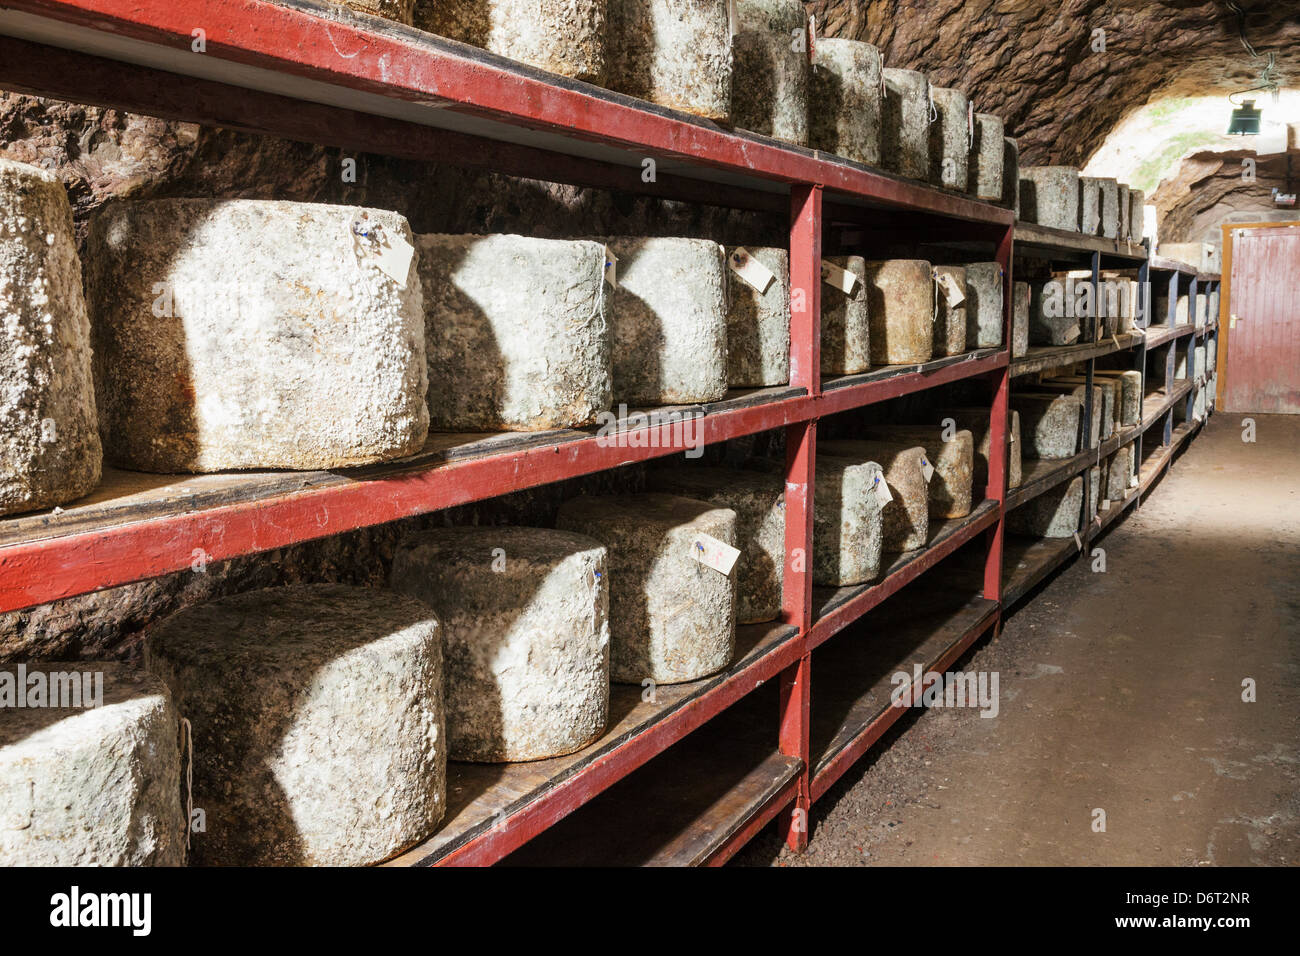 https://c8.alamy.com/comp/D6T2NR/uk-england-somerset-wookey-hole-wookey-hole-caves-cheddar-cheese-storage-D6T2NR.jpg